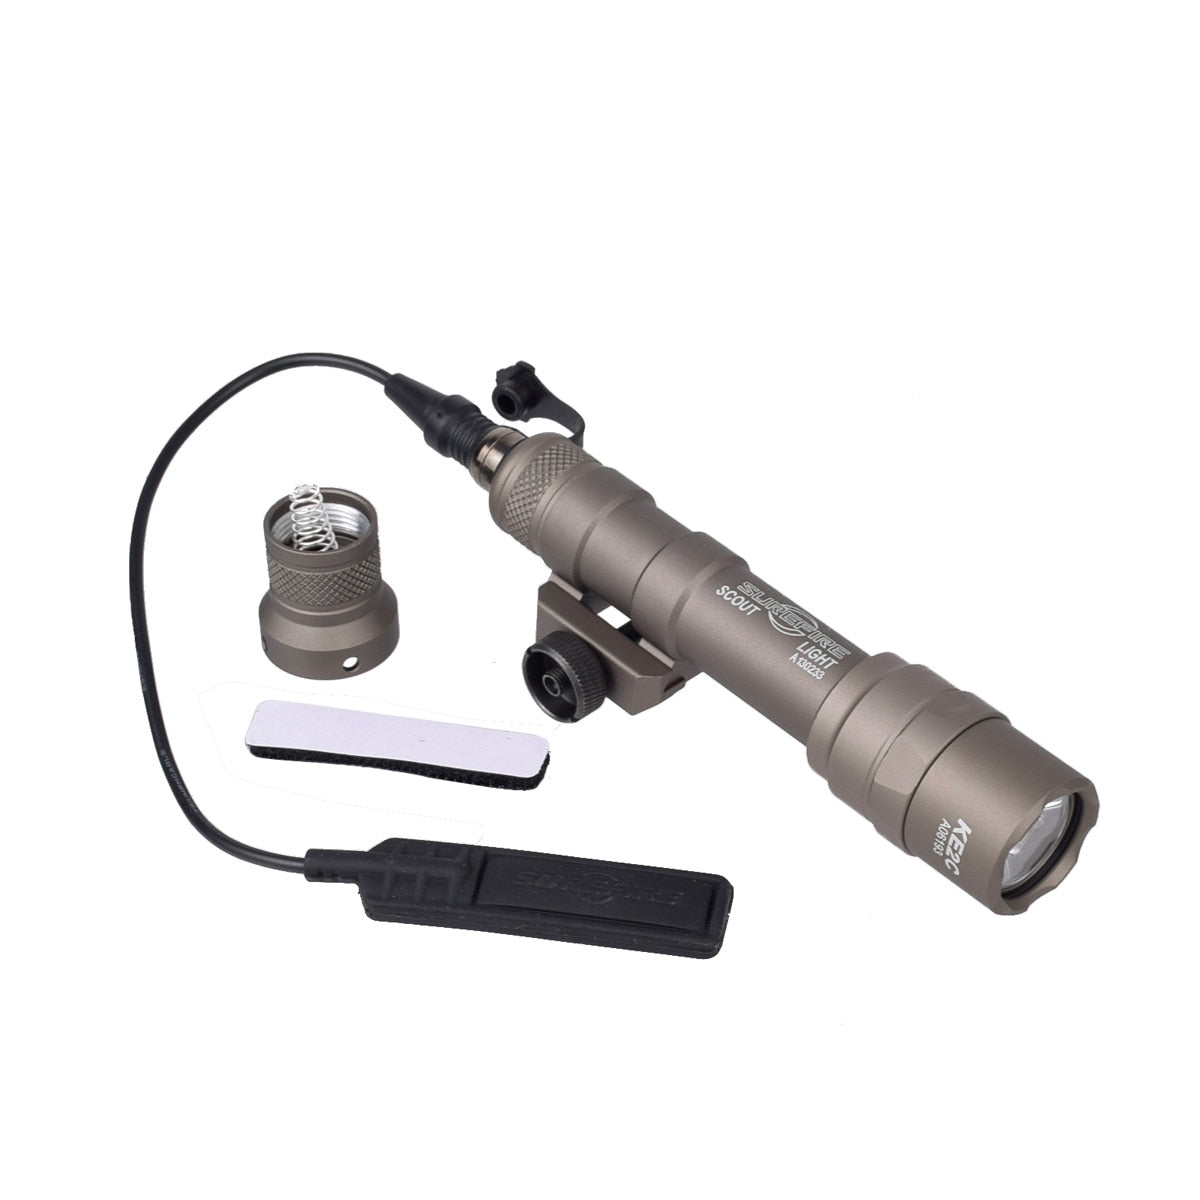 Airsoft replica M600 style flashlight (for airsoft use only)